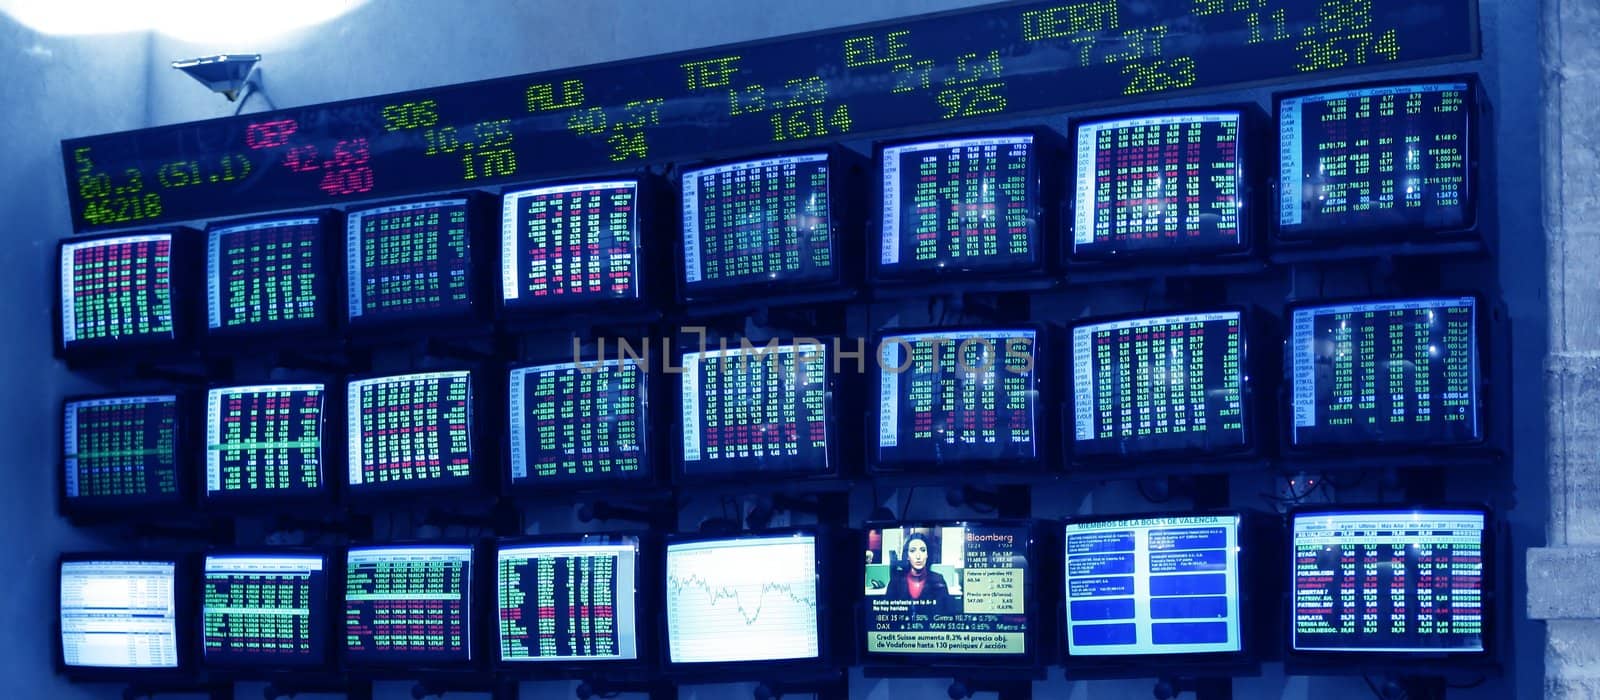 stock market multiple screen with euro reports in Spain